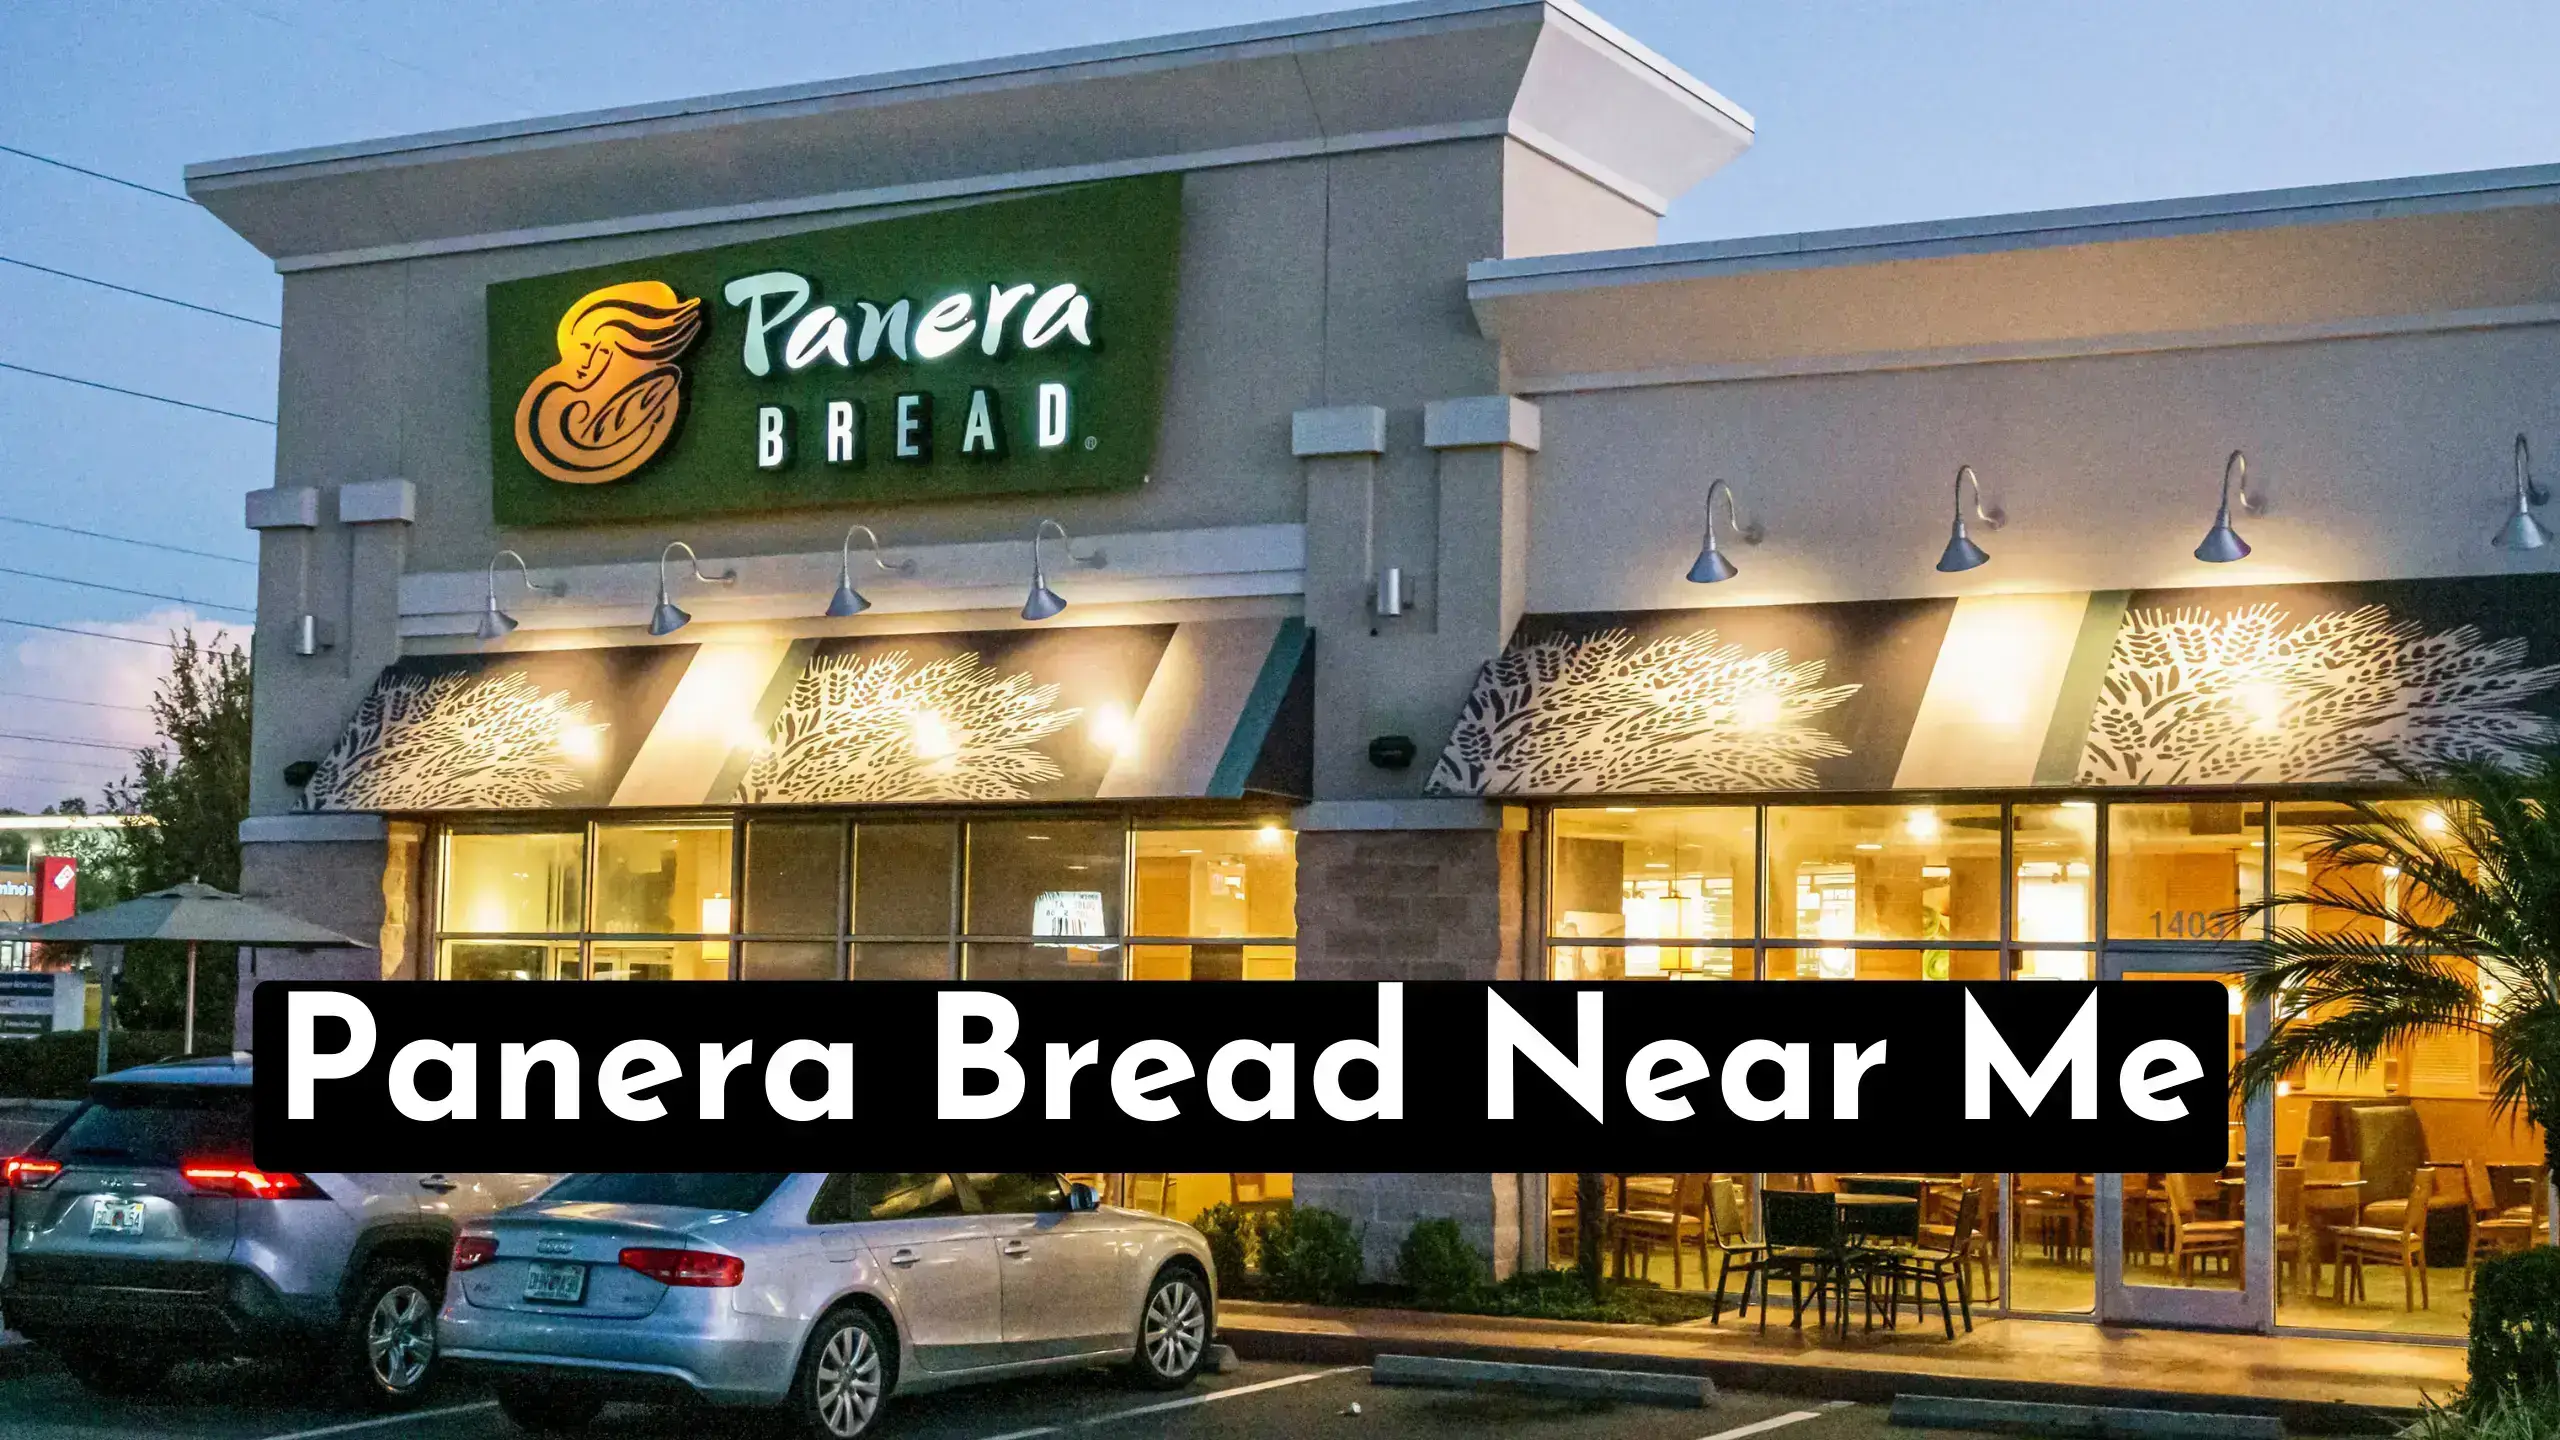 A Quick Guide To Find Panera Bread Near Me Locations | Also Quickly Find What Are The Top Menu Options At Panera Bread. | store-hour.com